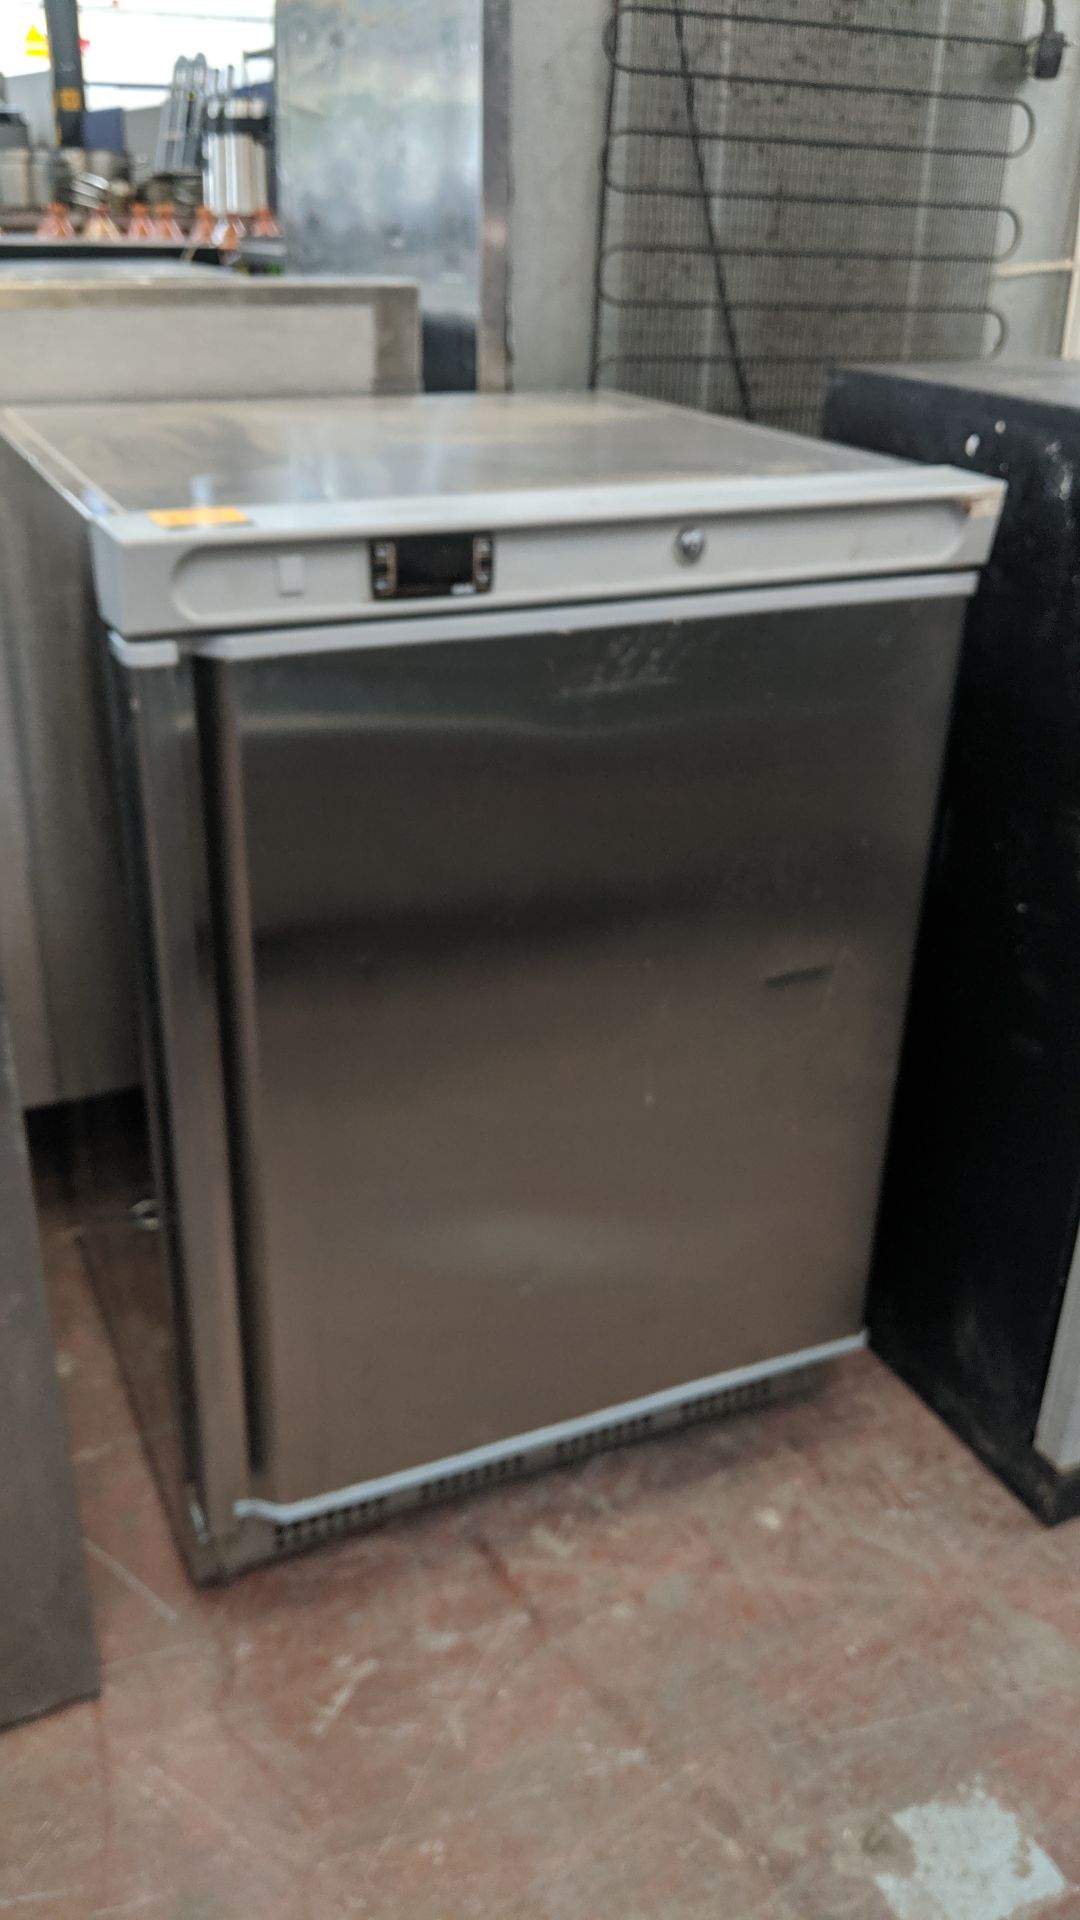 HR200 S/S counter height fridge IMPORTANT: Please remember goods successfully bid upon must be - Image 2 of 4